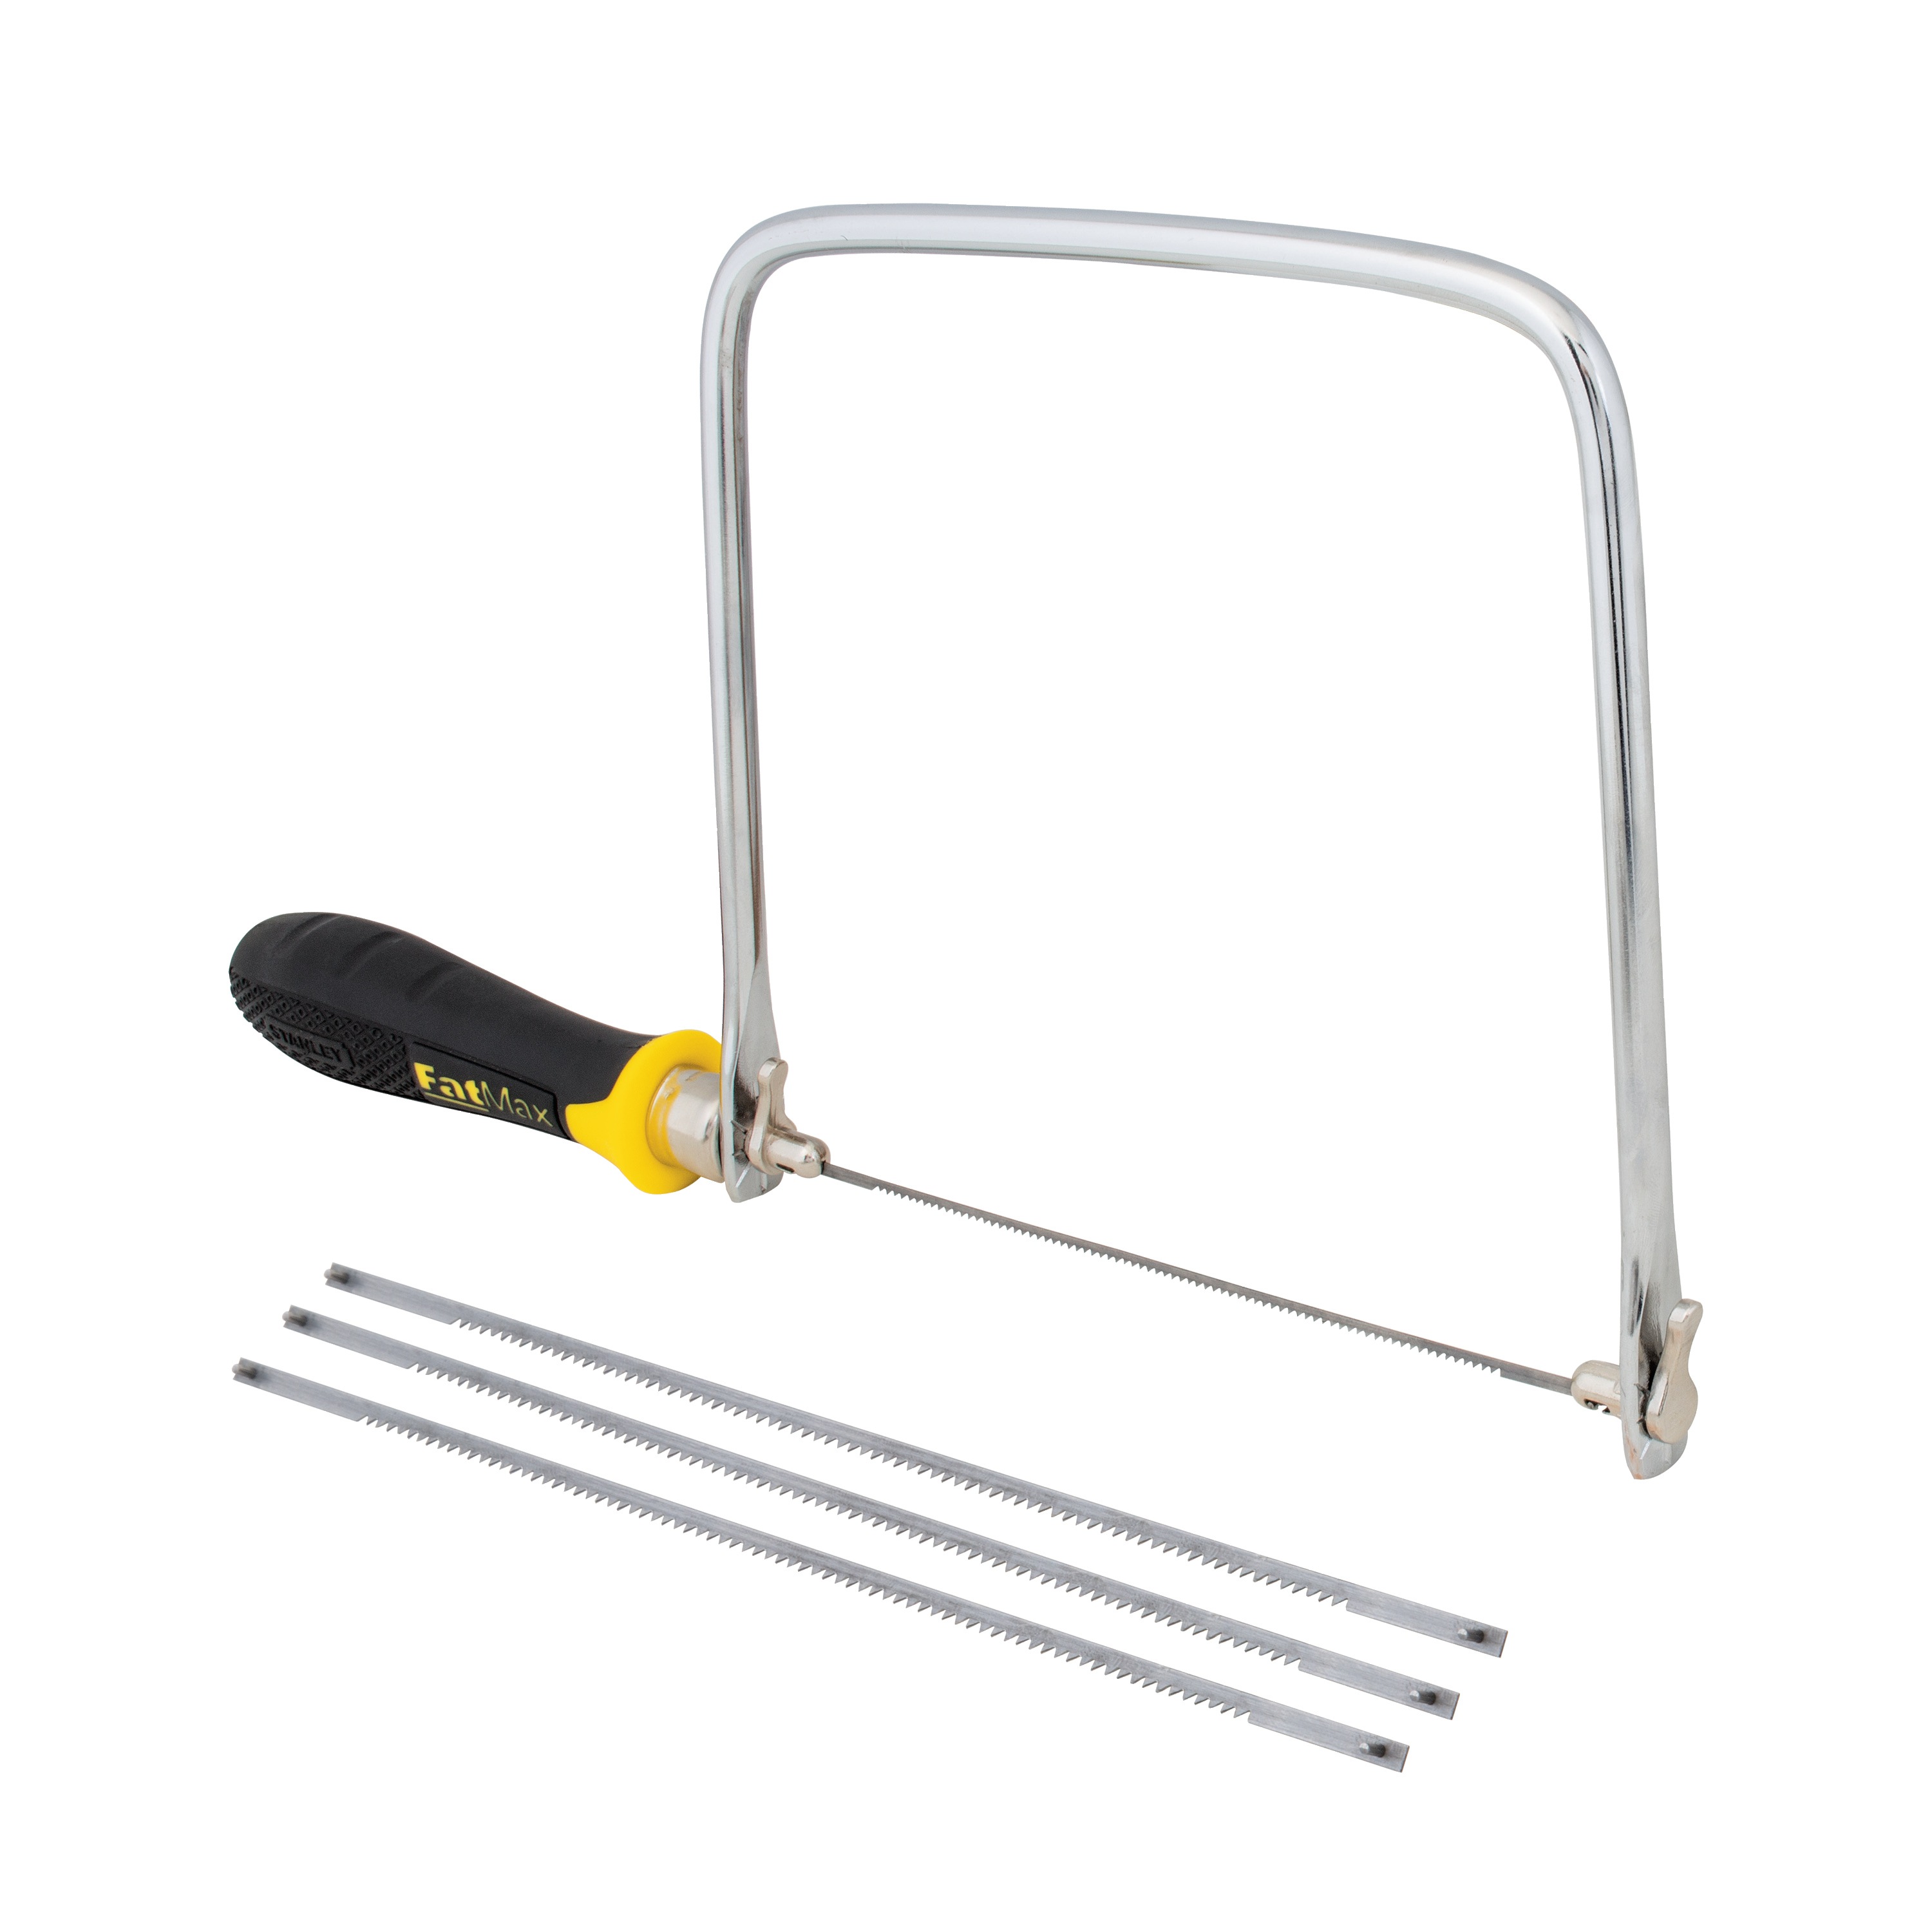 Stanley Tools - 634 in FATMAX Coping Saw With 3 Blades - 15-106A